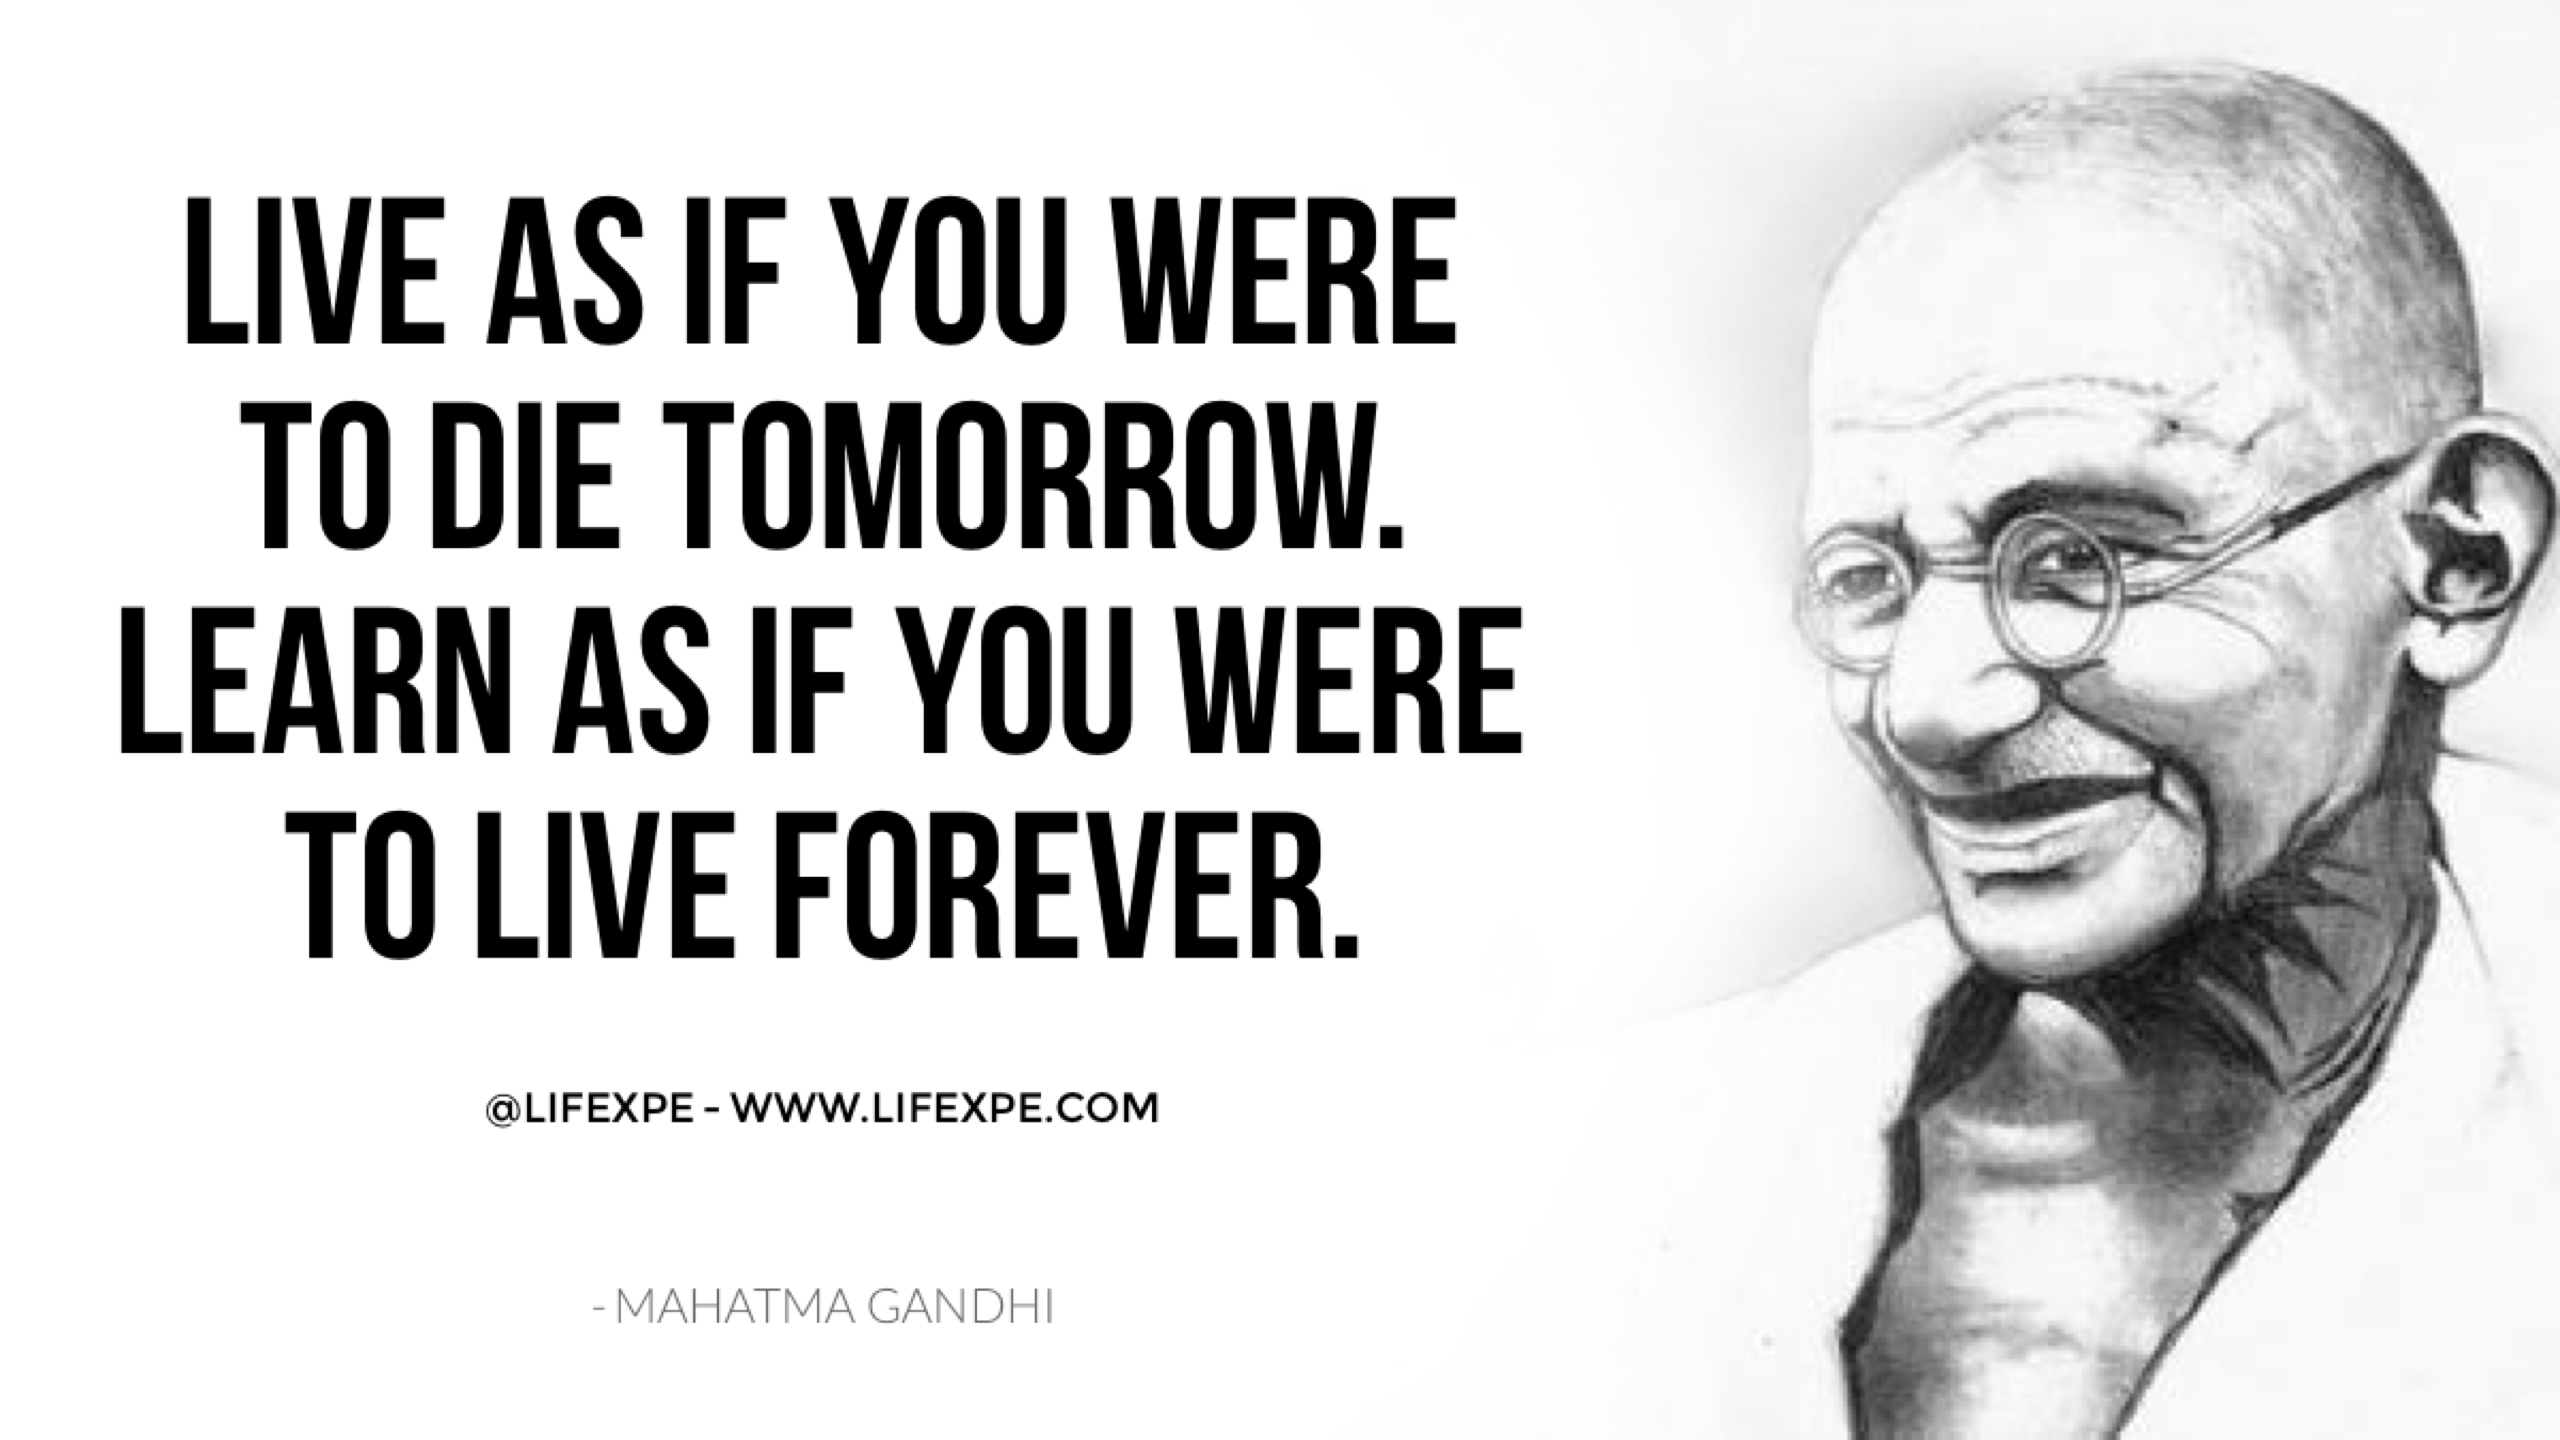 Mahatma Gandhi quote 29 Exciting Reasons Why Life is Great